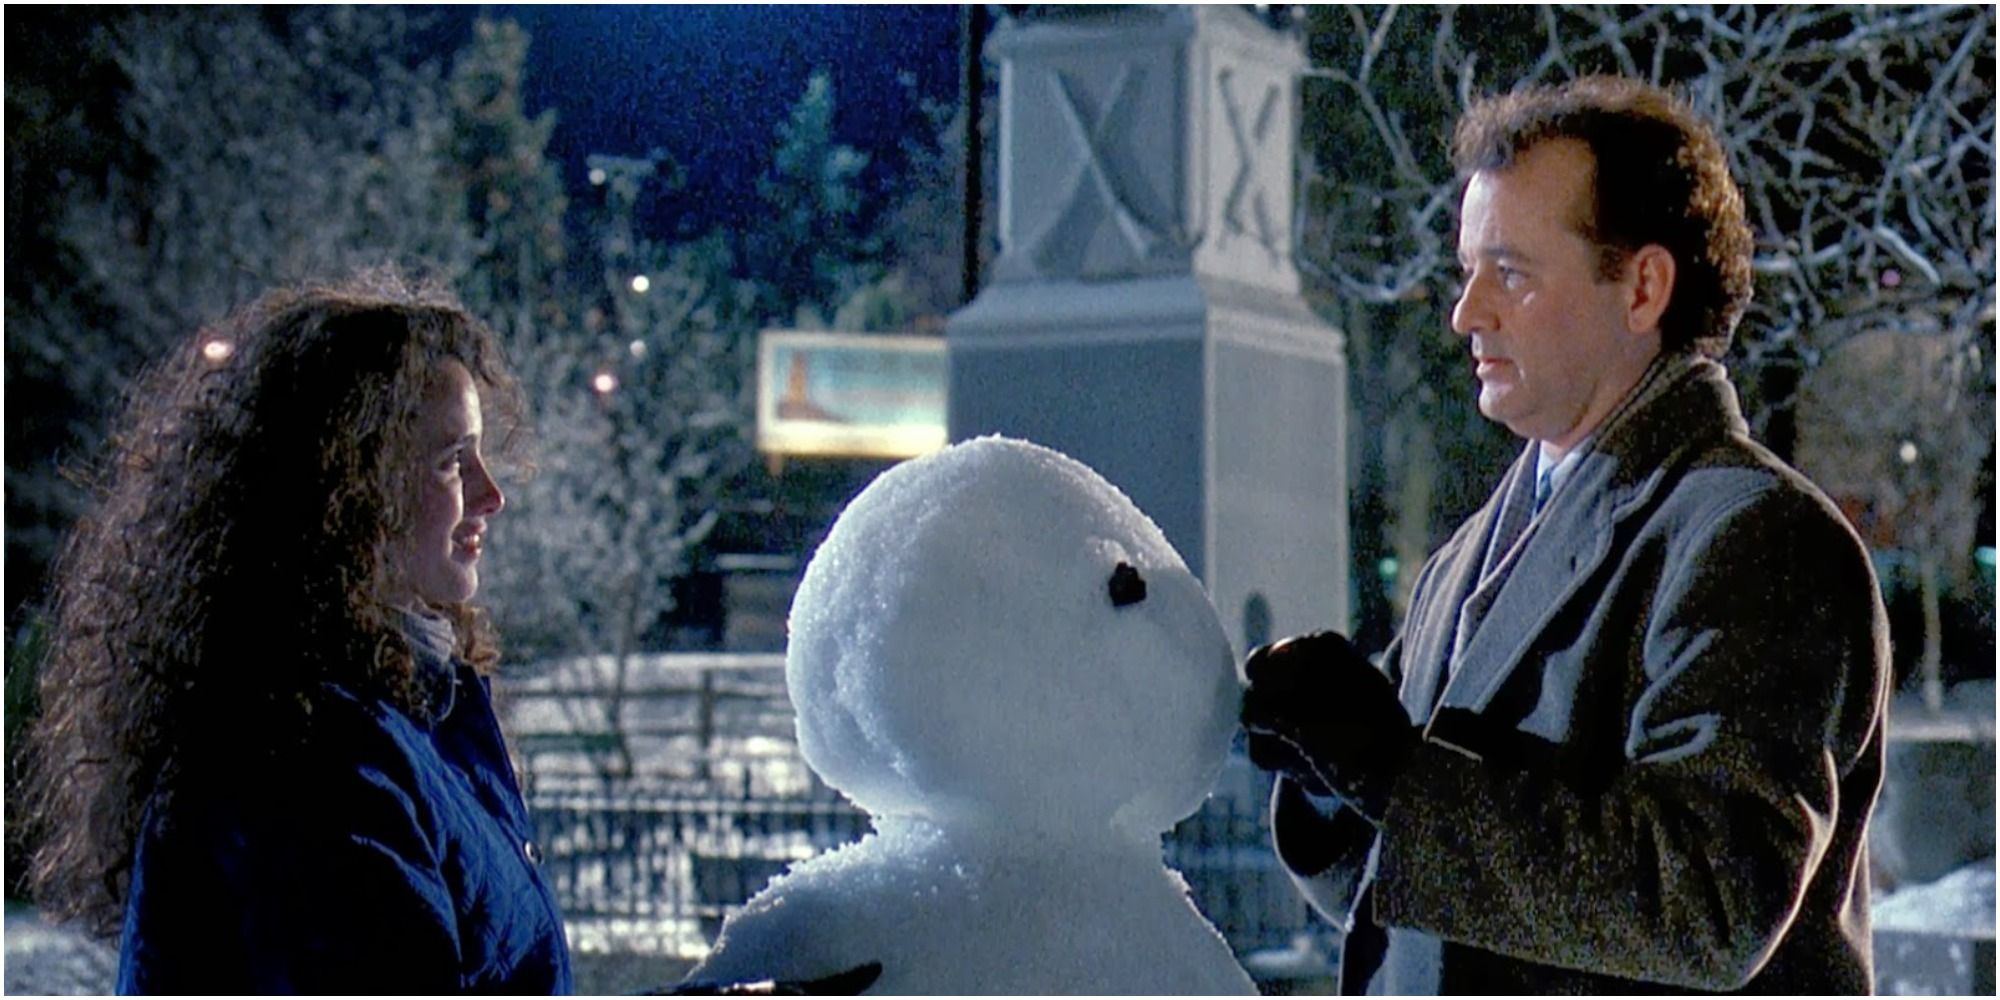 Bill Murray and Andiw MacDowell make a snowman in Groundhog Day.